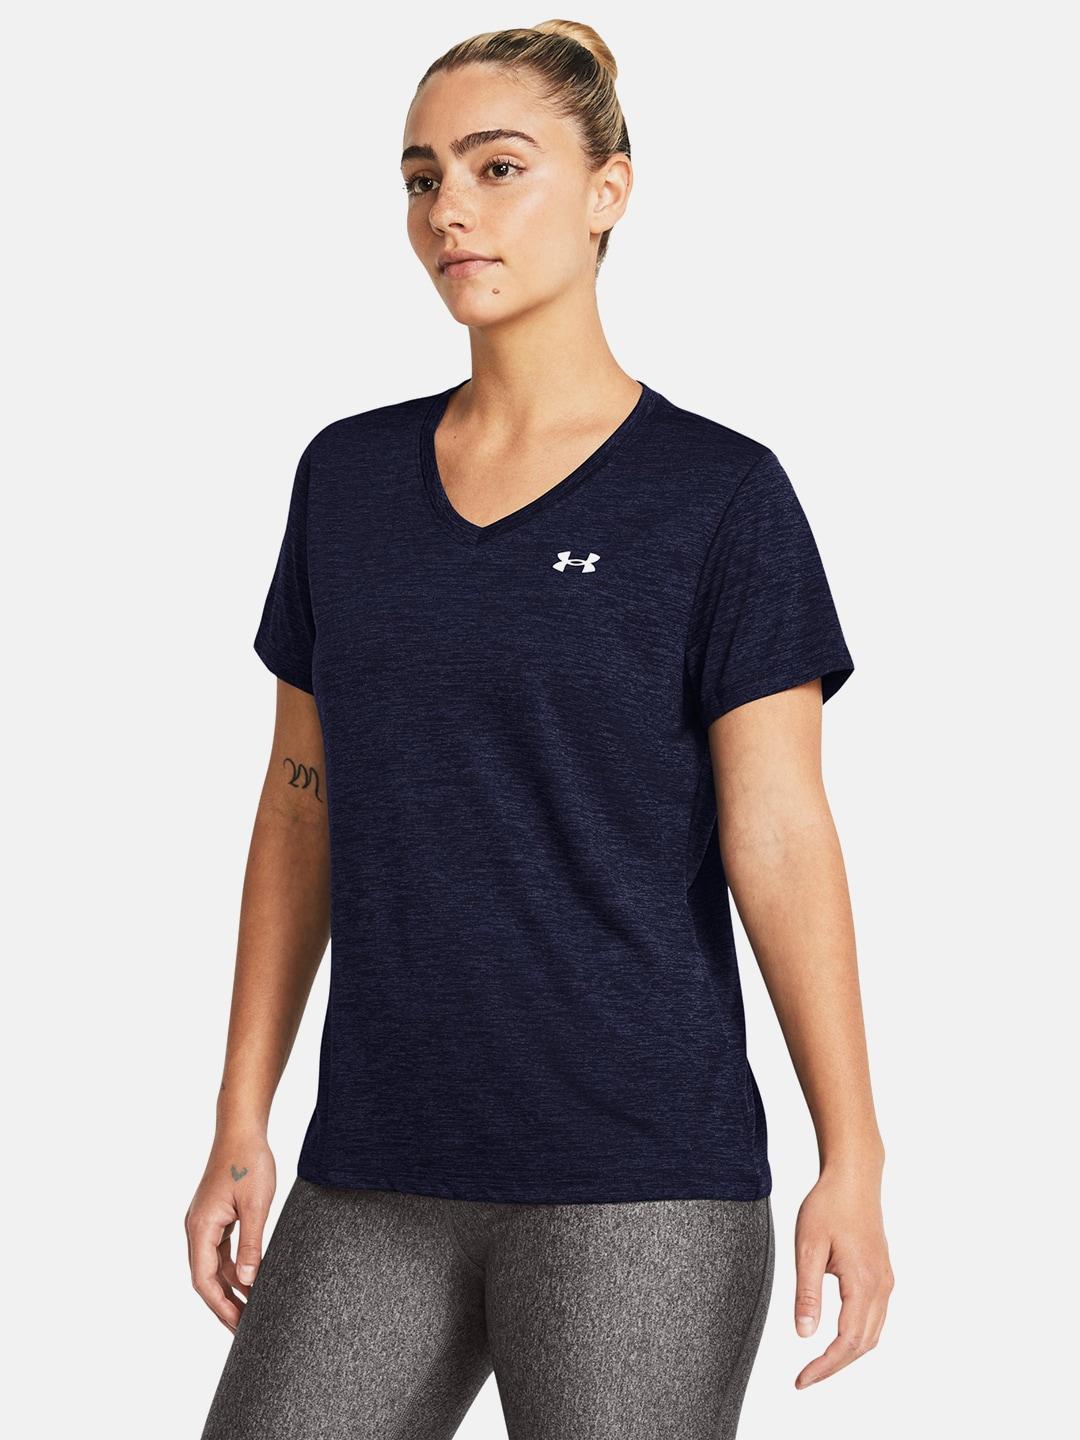 under armour brand logo printed detail fast-drying loose fit tech twist t-shirt